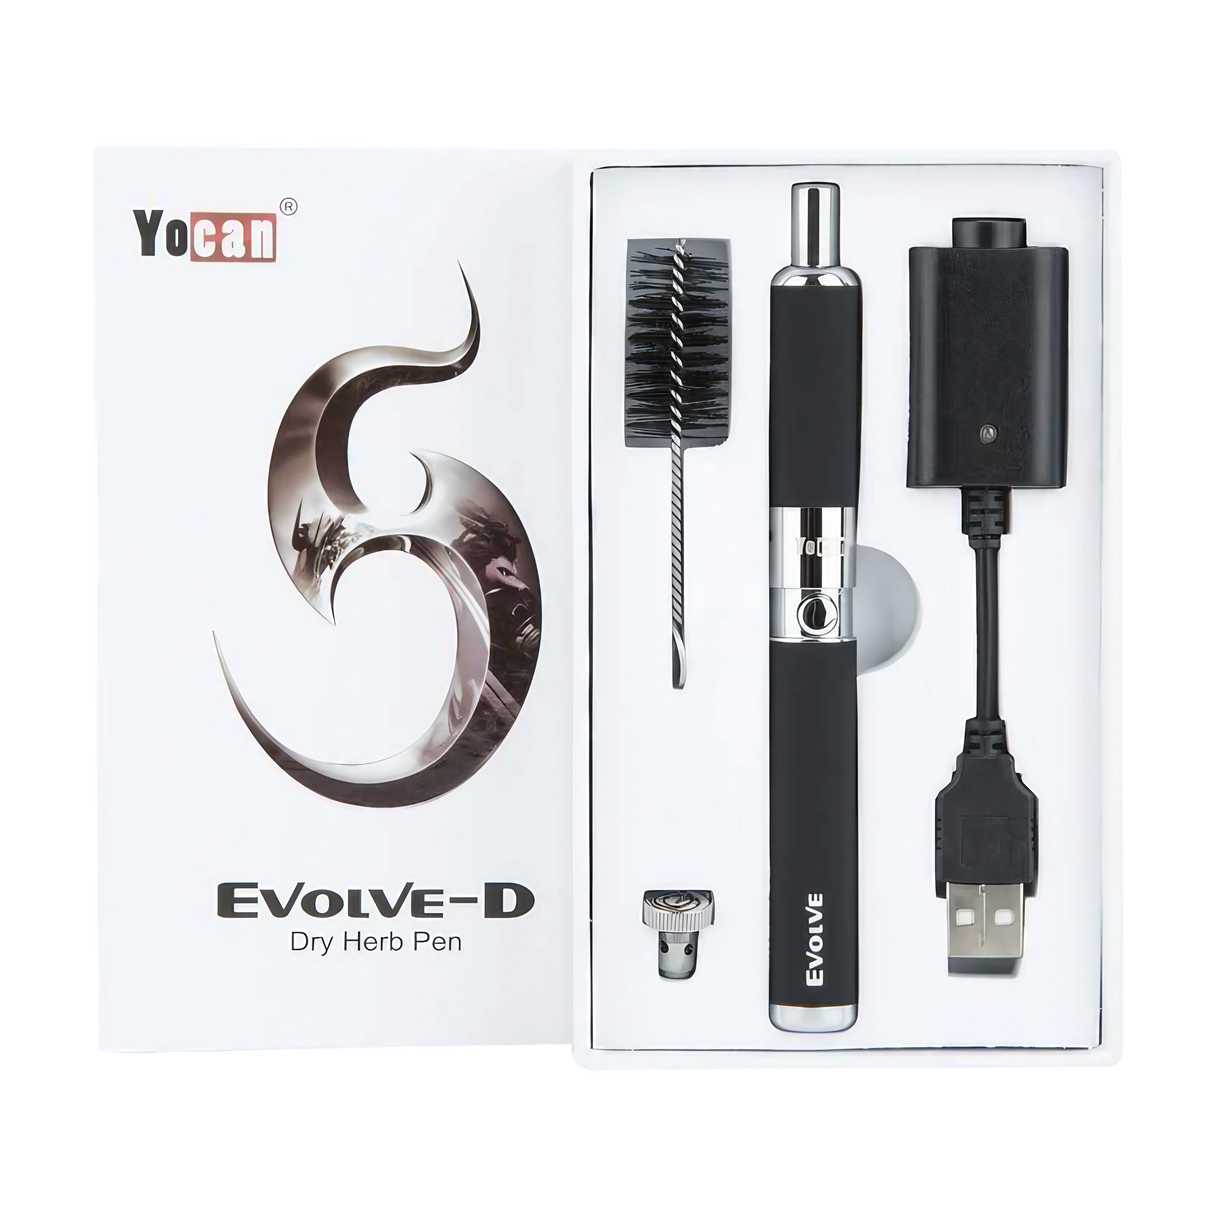 Yocan Evolve-D Dry Herb Vaporizer in Black with USB Charger and Cleaning Brush